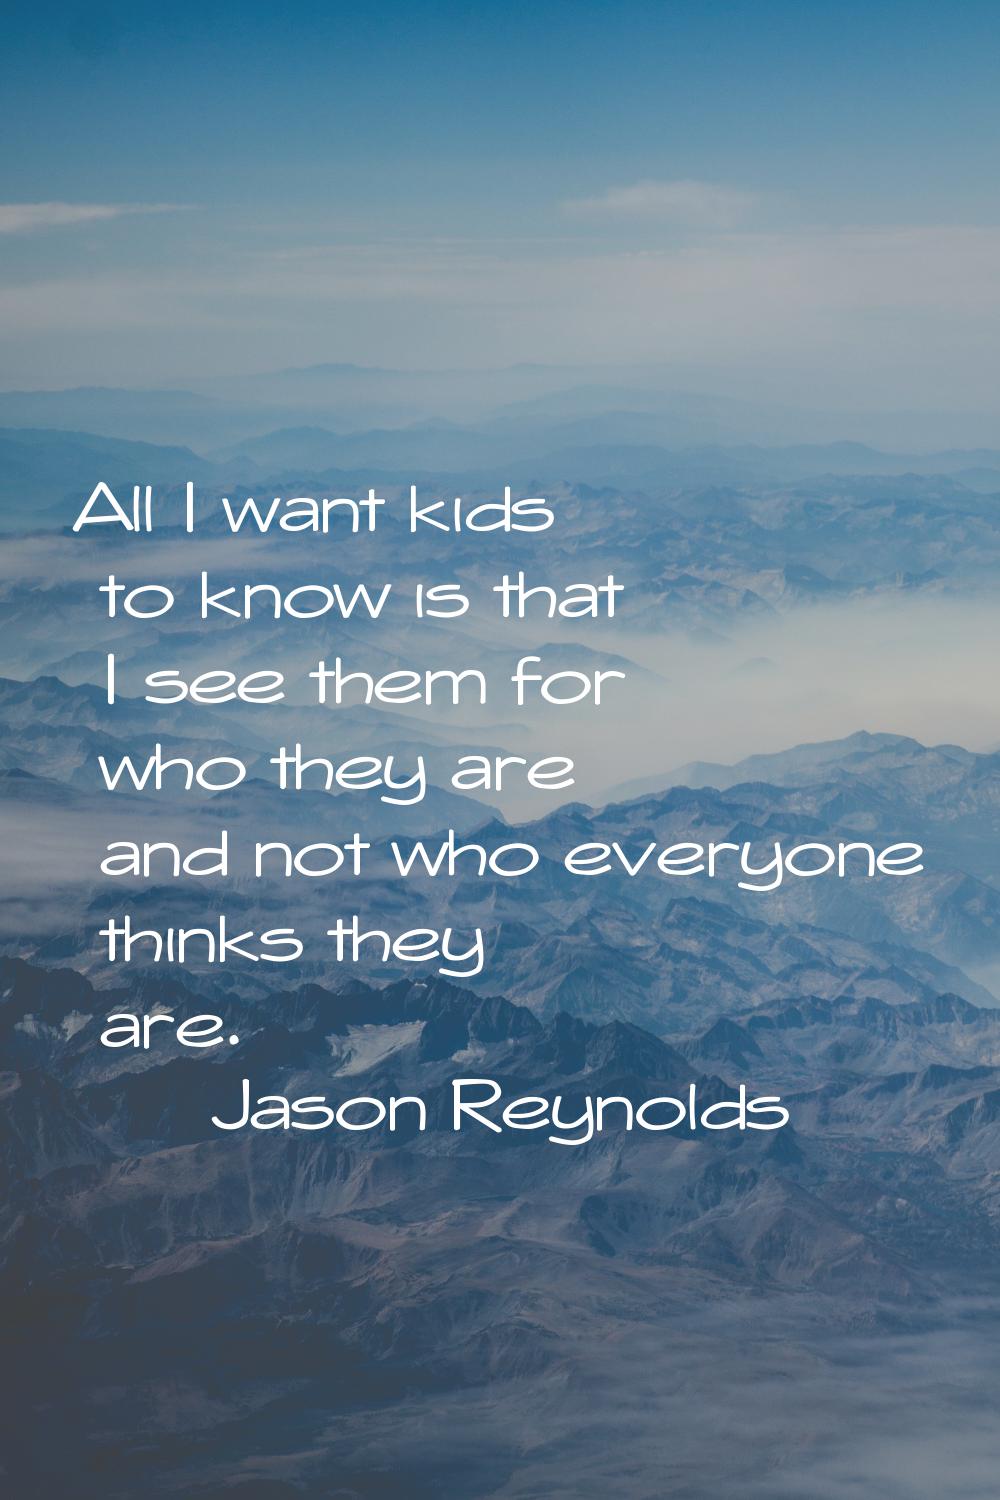 All I want kids to know is that I see them for who they are and not who everyone thinks they are.